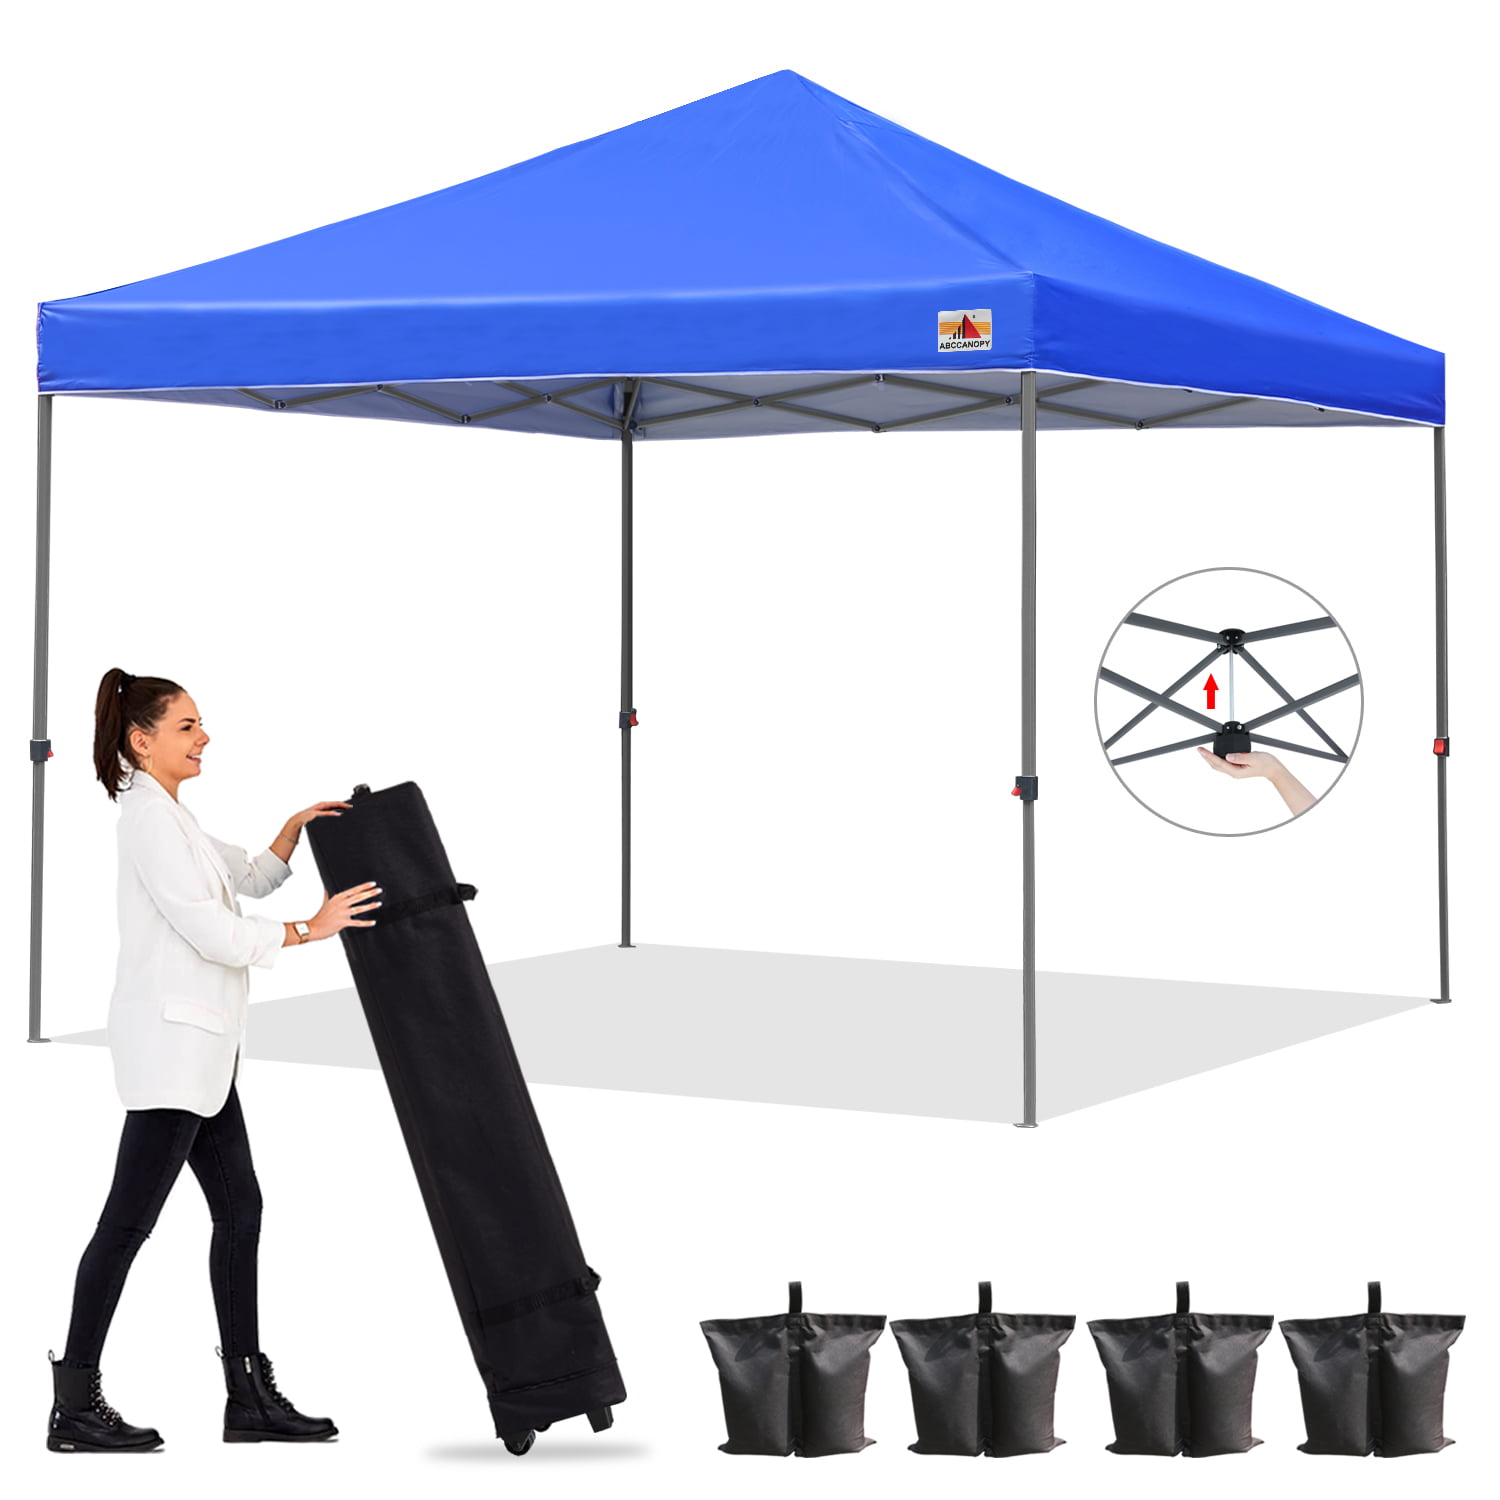 ABCCANOPY Canopy Tent 8x8 Pop Up Canopy Tent Commercial Instant Shade Tent with Upgrade Roller Bag 